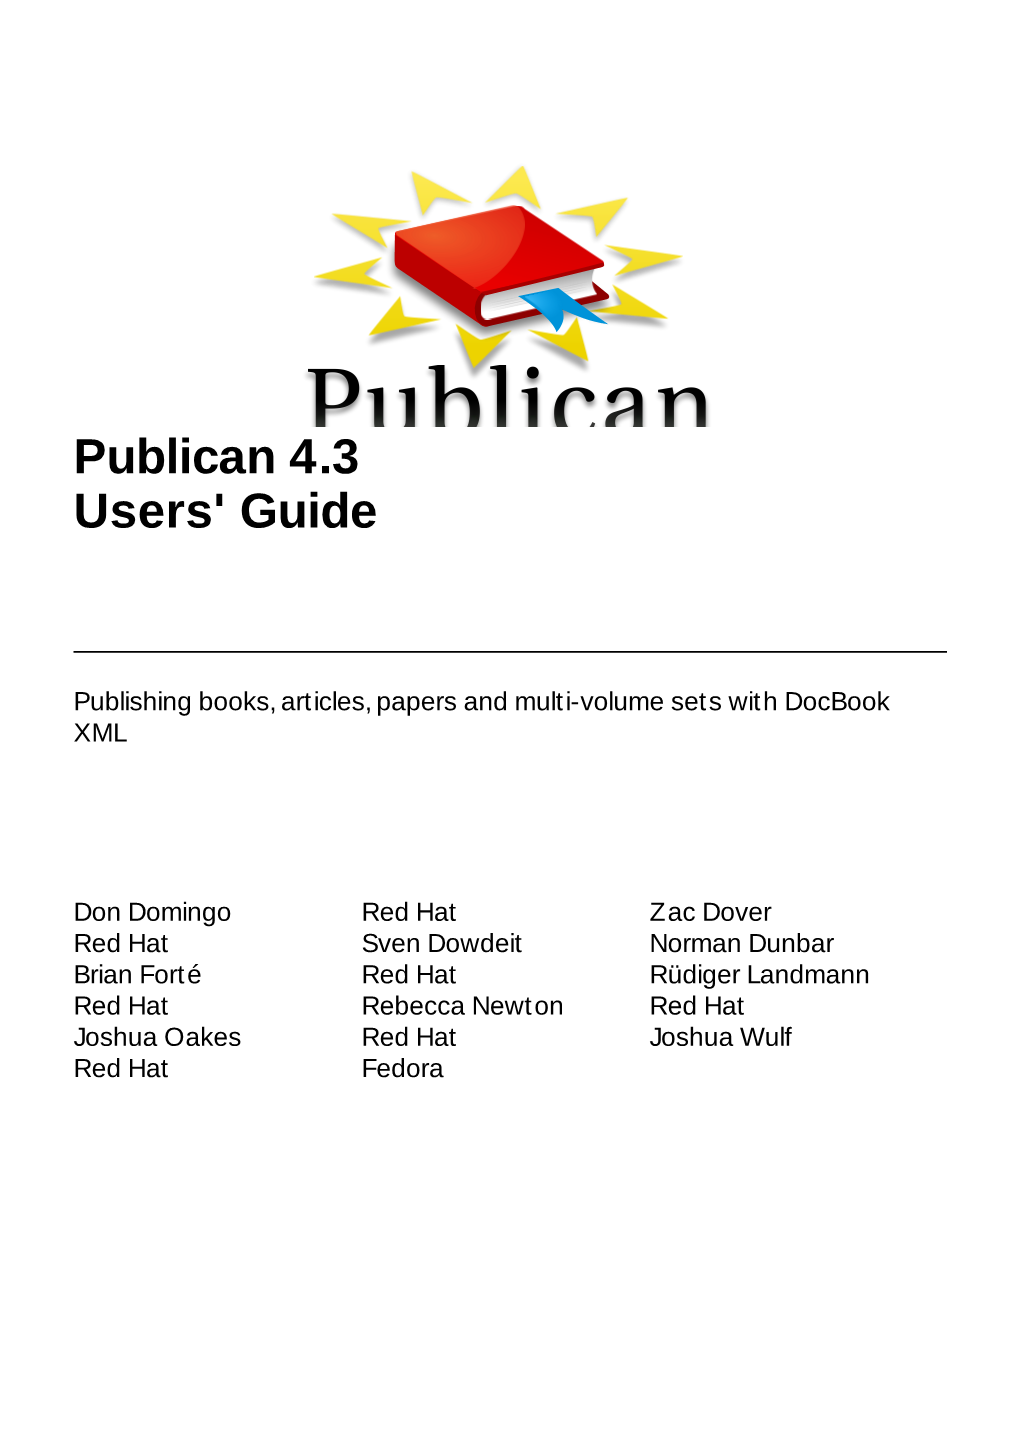 Publican 4.3 Users' Guide